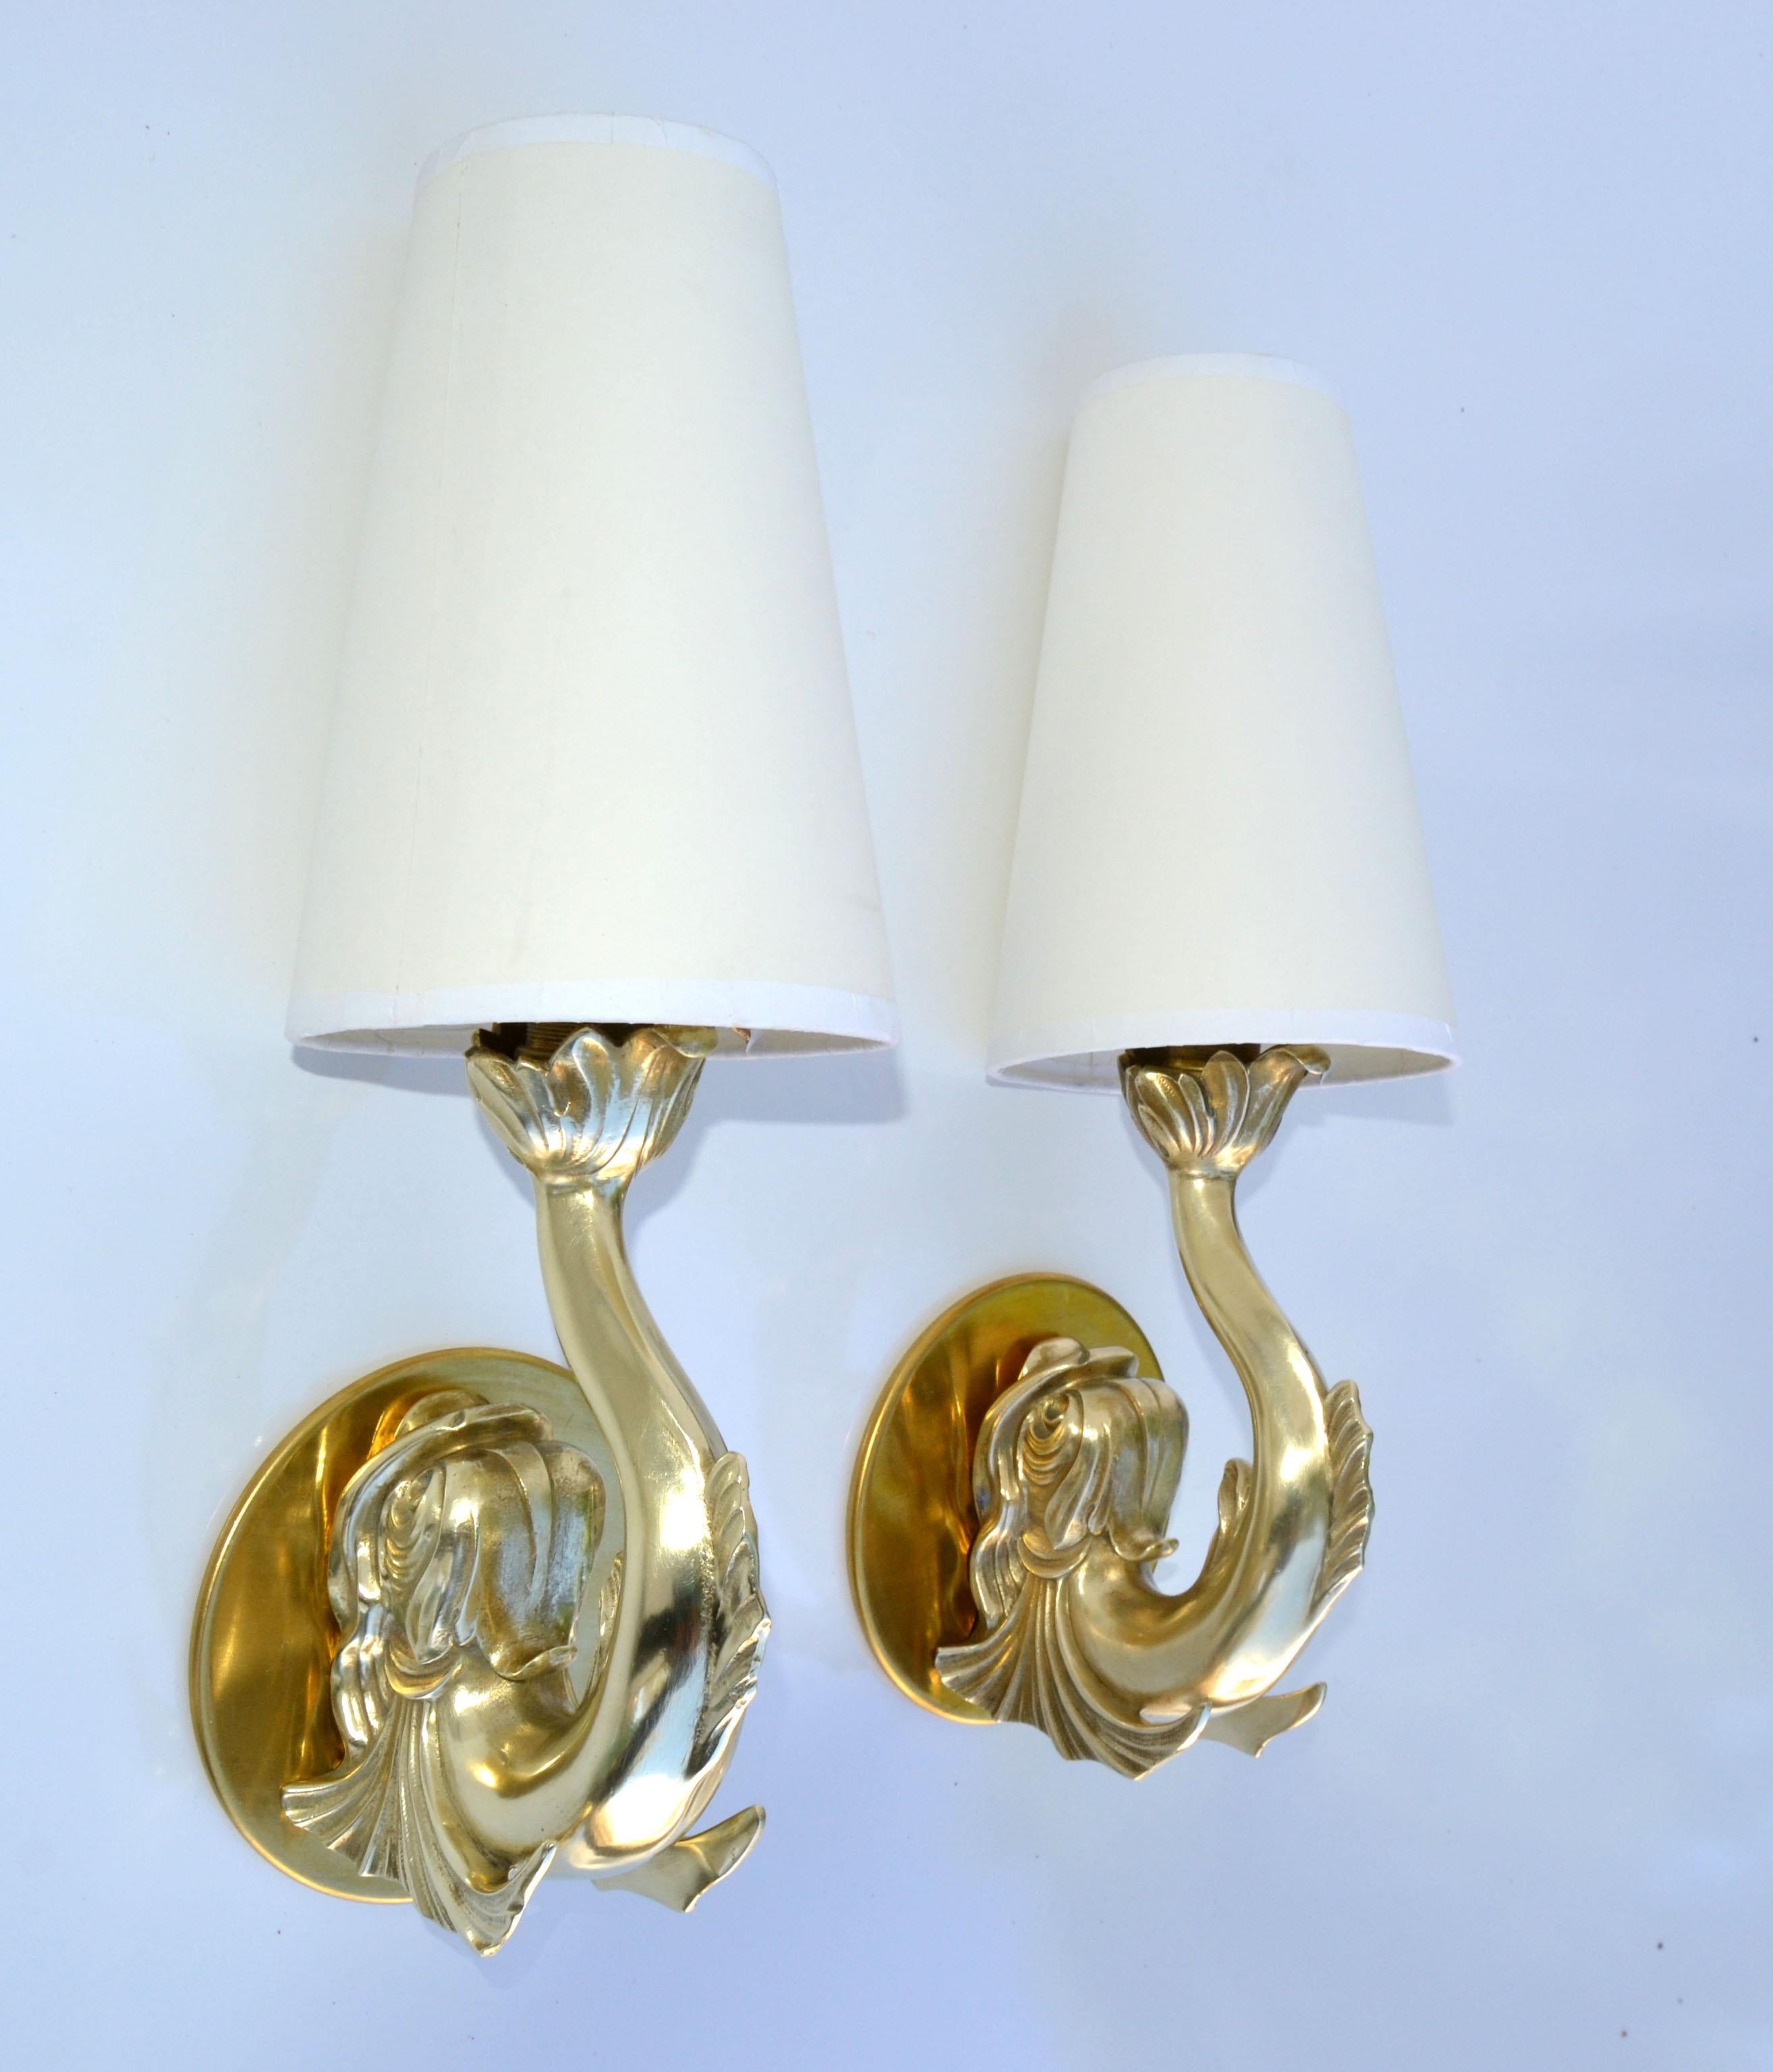 Maison Lancel Polished Bronze Koi Fish Sconces Creme Cone Shade France 1950-Pair In Good Condition For Sale In Miami, FL